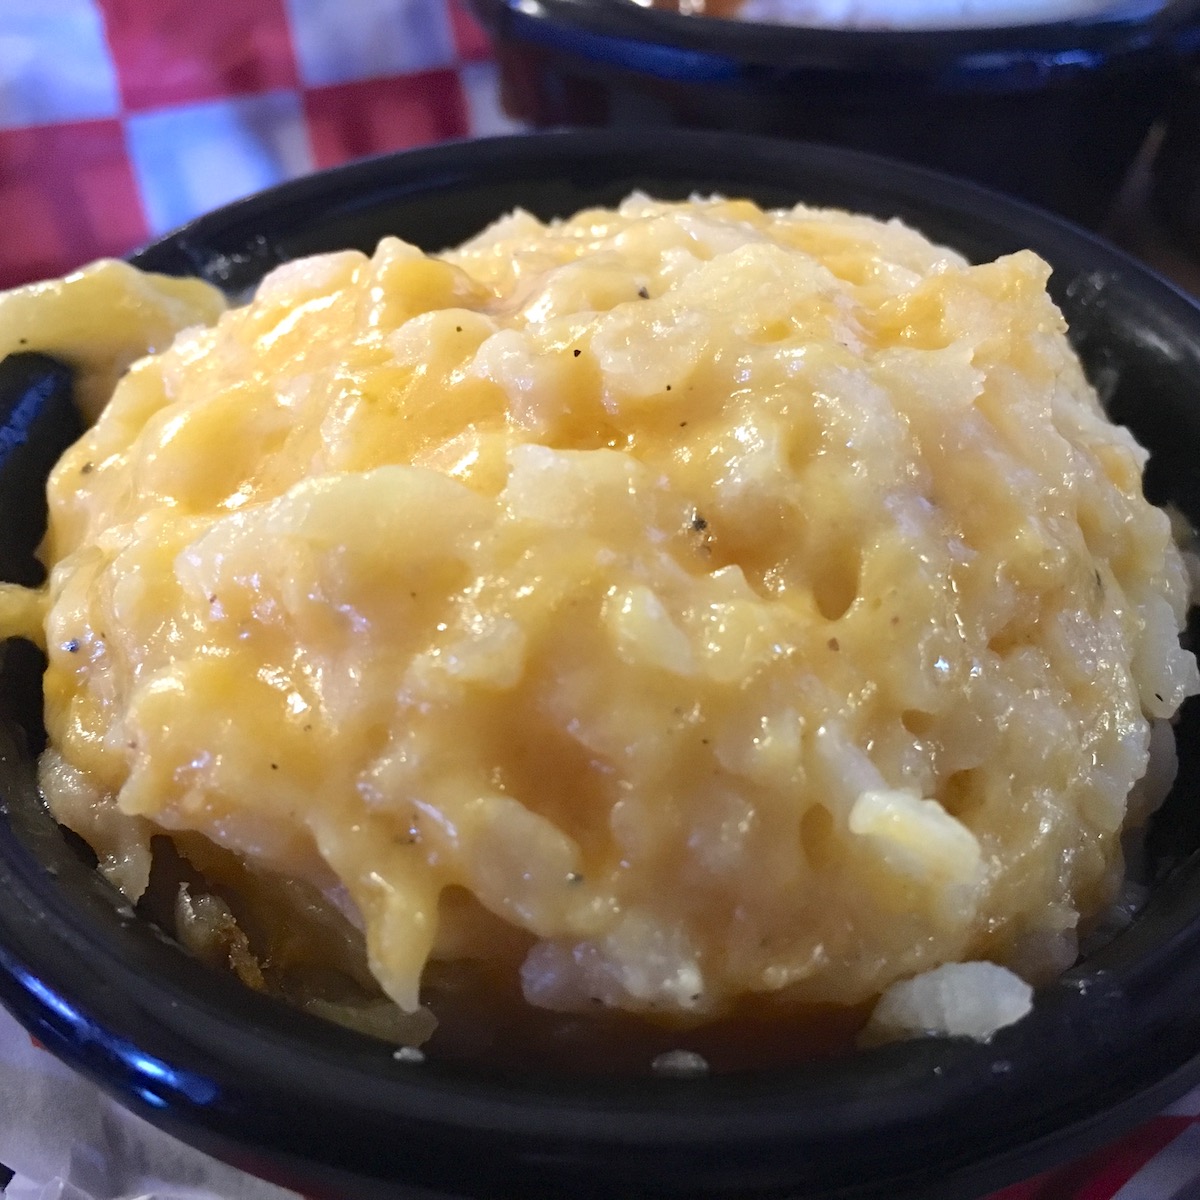 Cheesy Hashbrown Casserole from Shiver's BBQ in Homestead, Florida